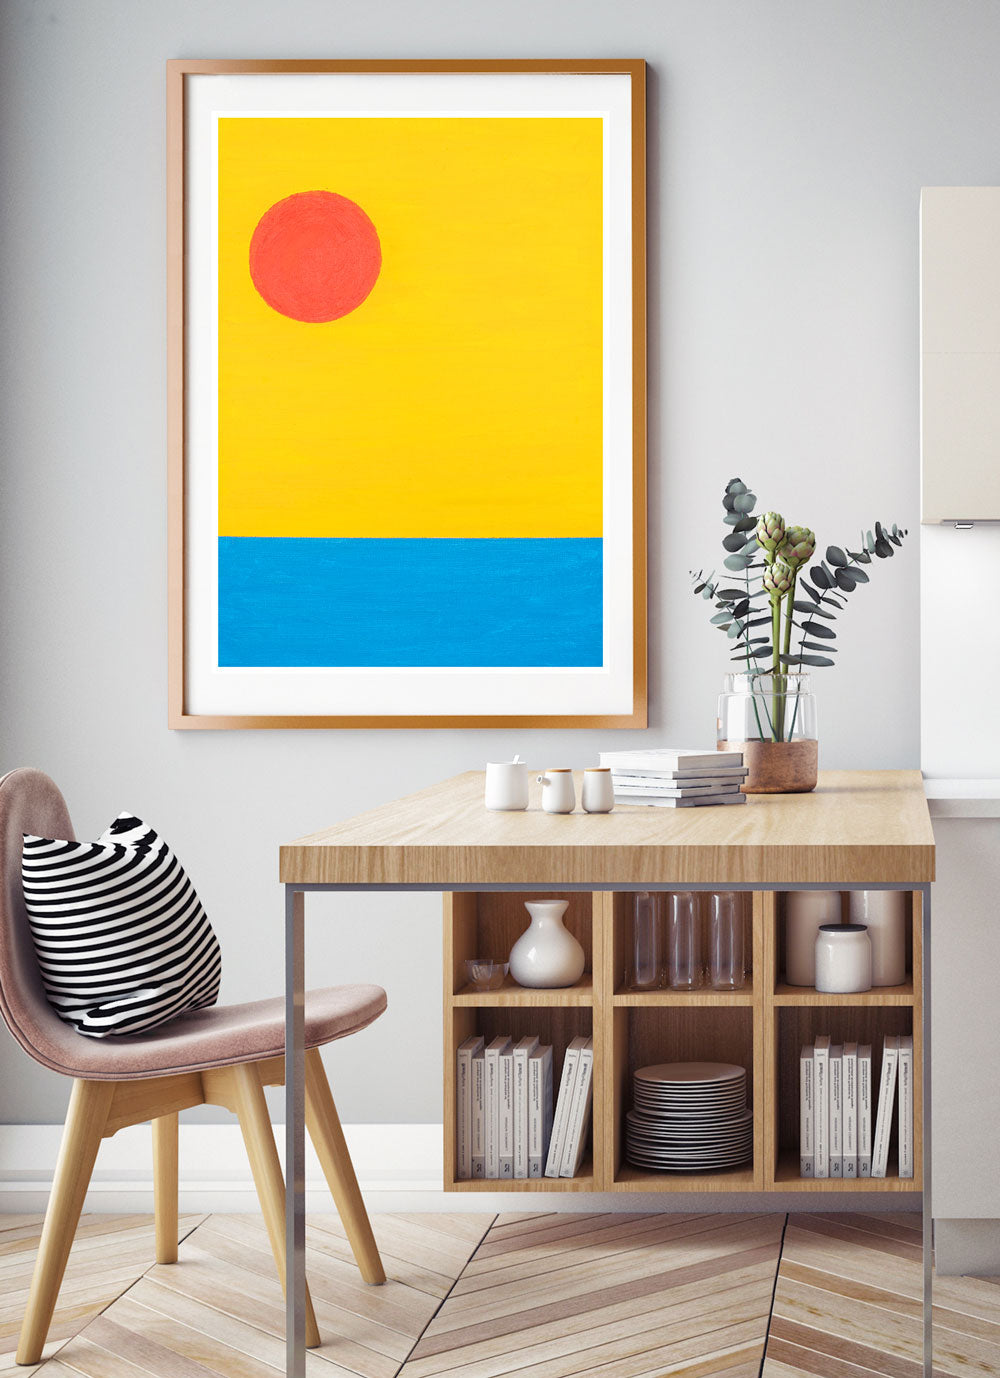 Sun and Sea for Shore Abstract Landscape Art in a kitchen area